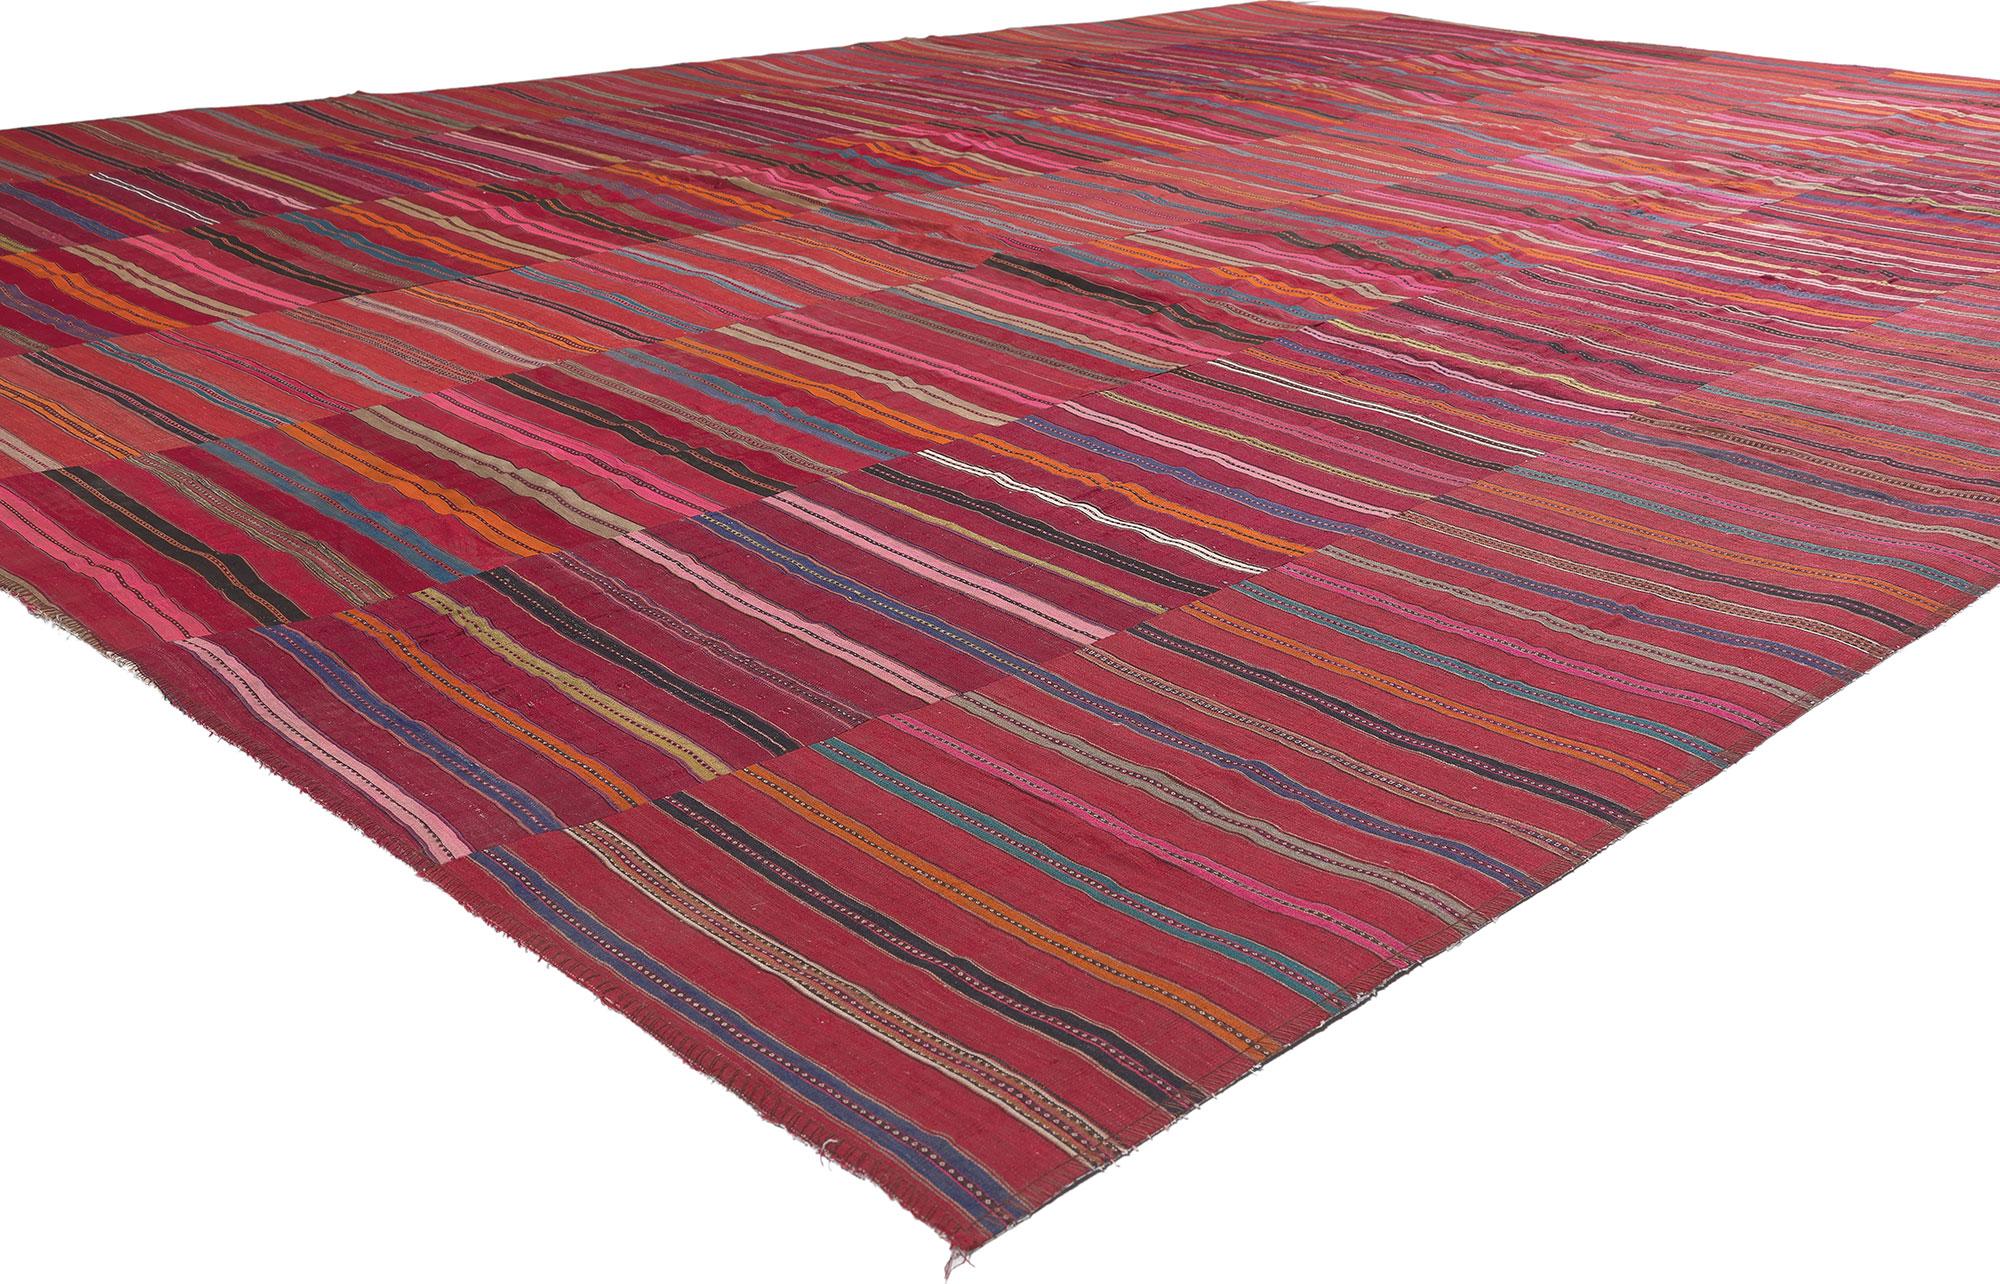 ​60645 Vintage Turkish Striped Kilim Rug, 09'05 x 13'00.
Weathered charm meets rugged beauty with rustic sensibility in this handwoven wool vintage Turkish kilim rug. The striped design and vibrant colors woven into this piece work together creating